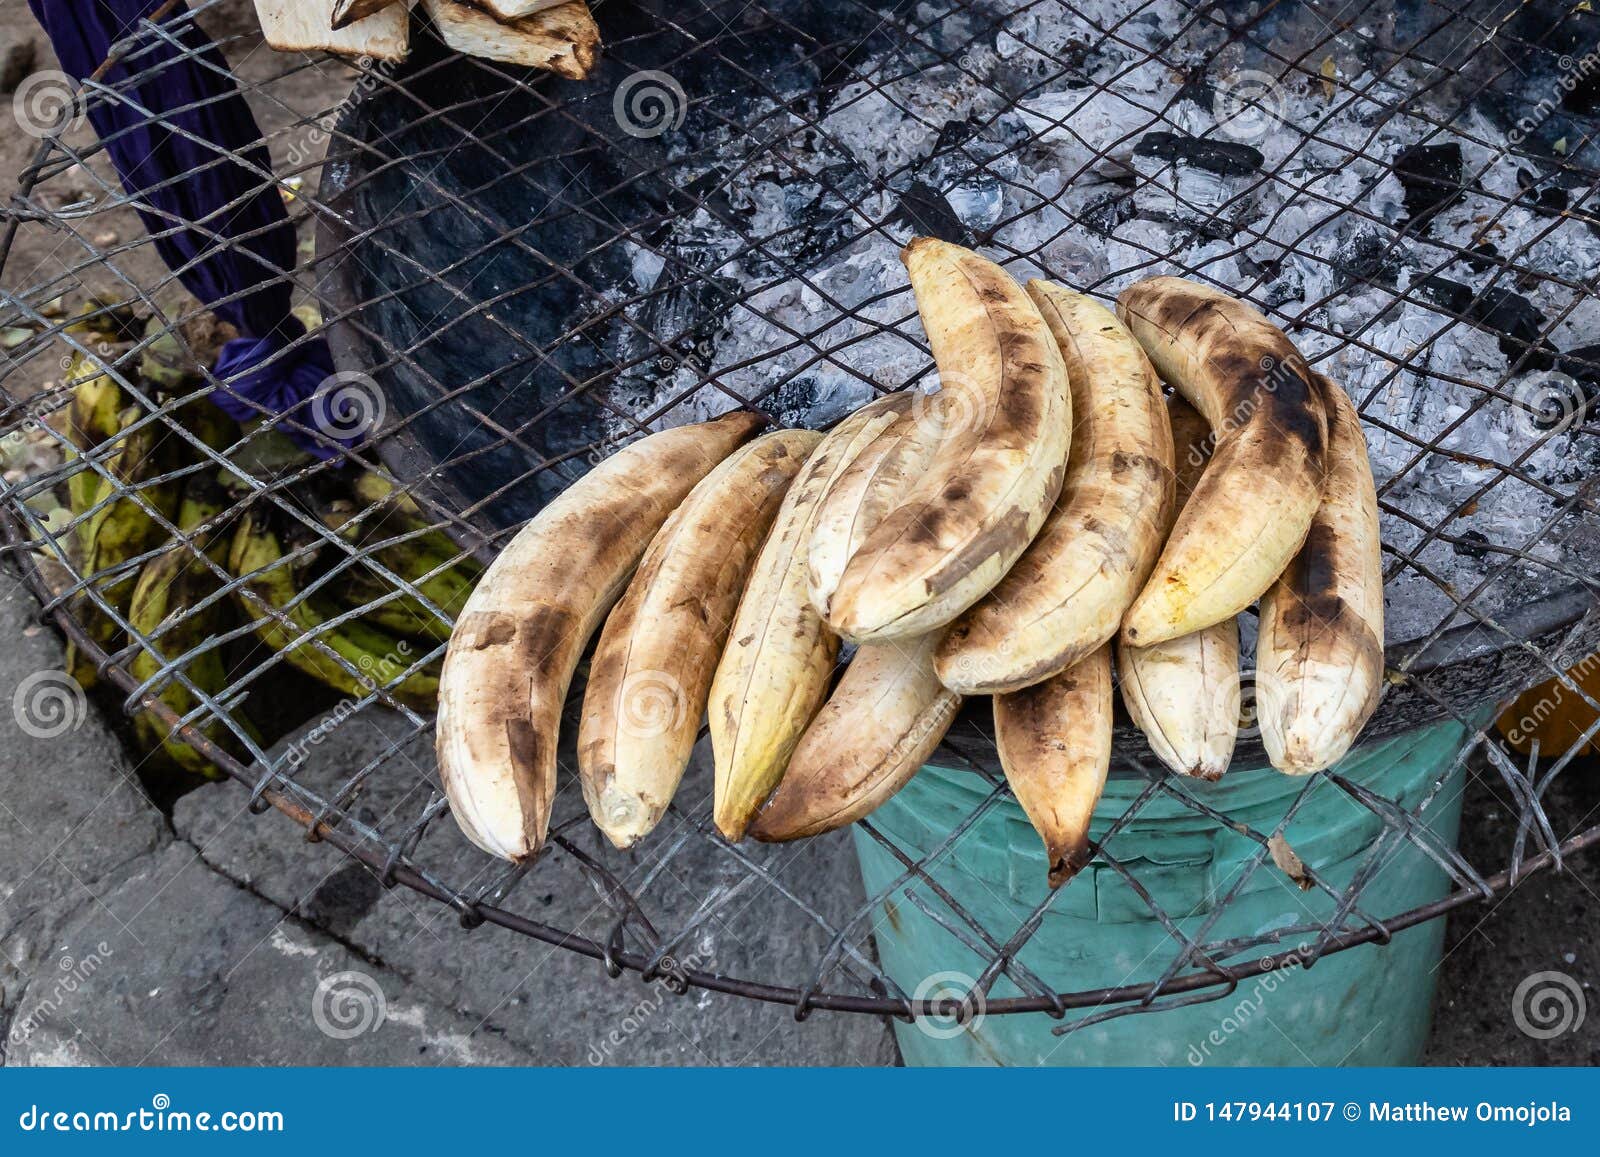 street foods in lagos nigeria; bole otherwise known as roasted plantain